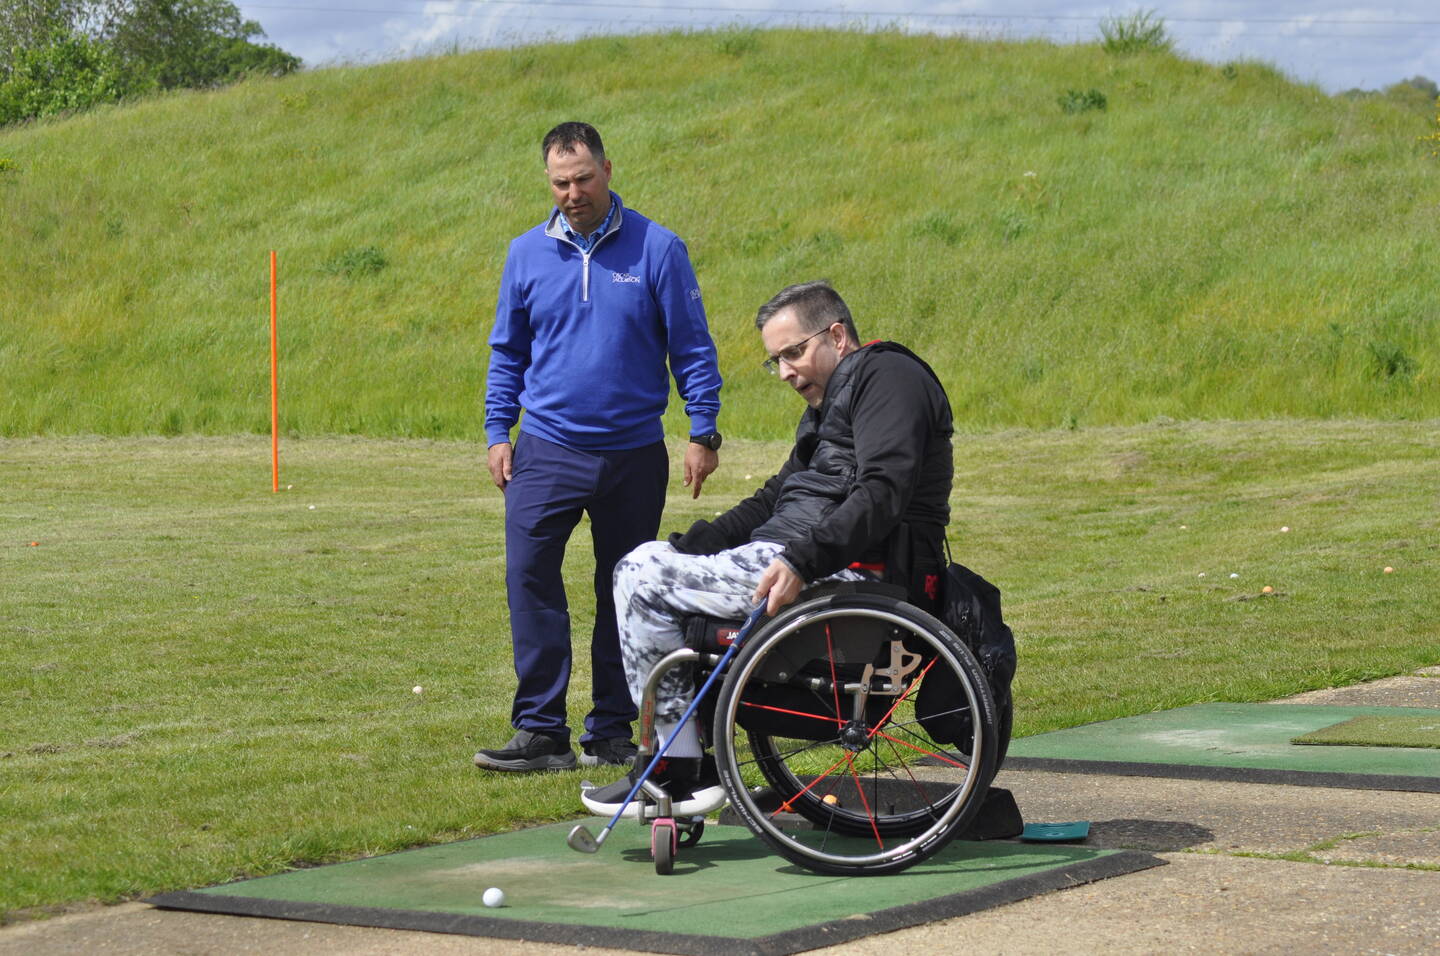 A disabled man in a wheelchair is playing golf. He is holding a golf club, ready to hit a golf ball on a mat. There is a coach behind him watching his moves. They are on a golf course.